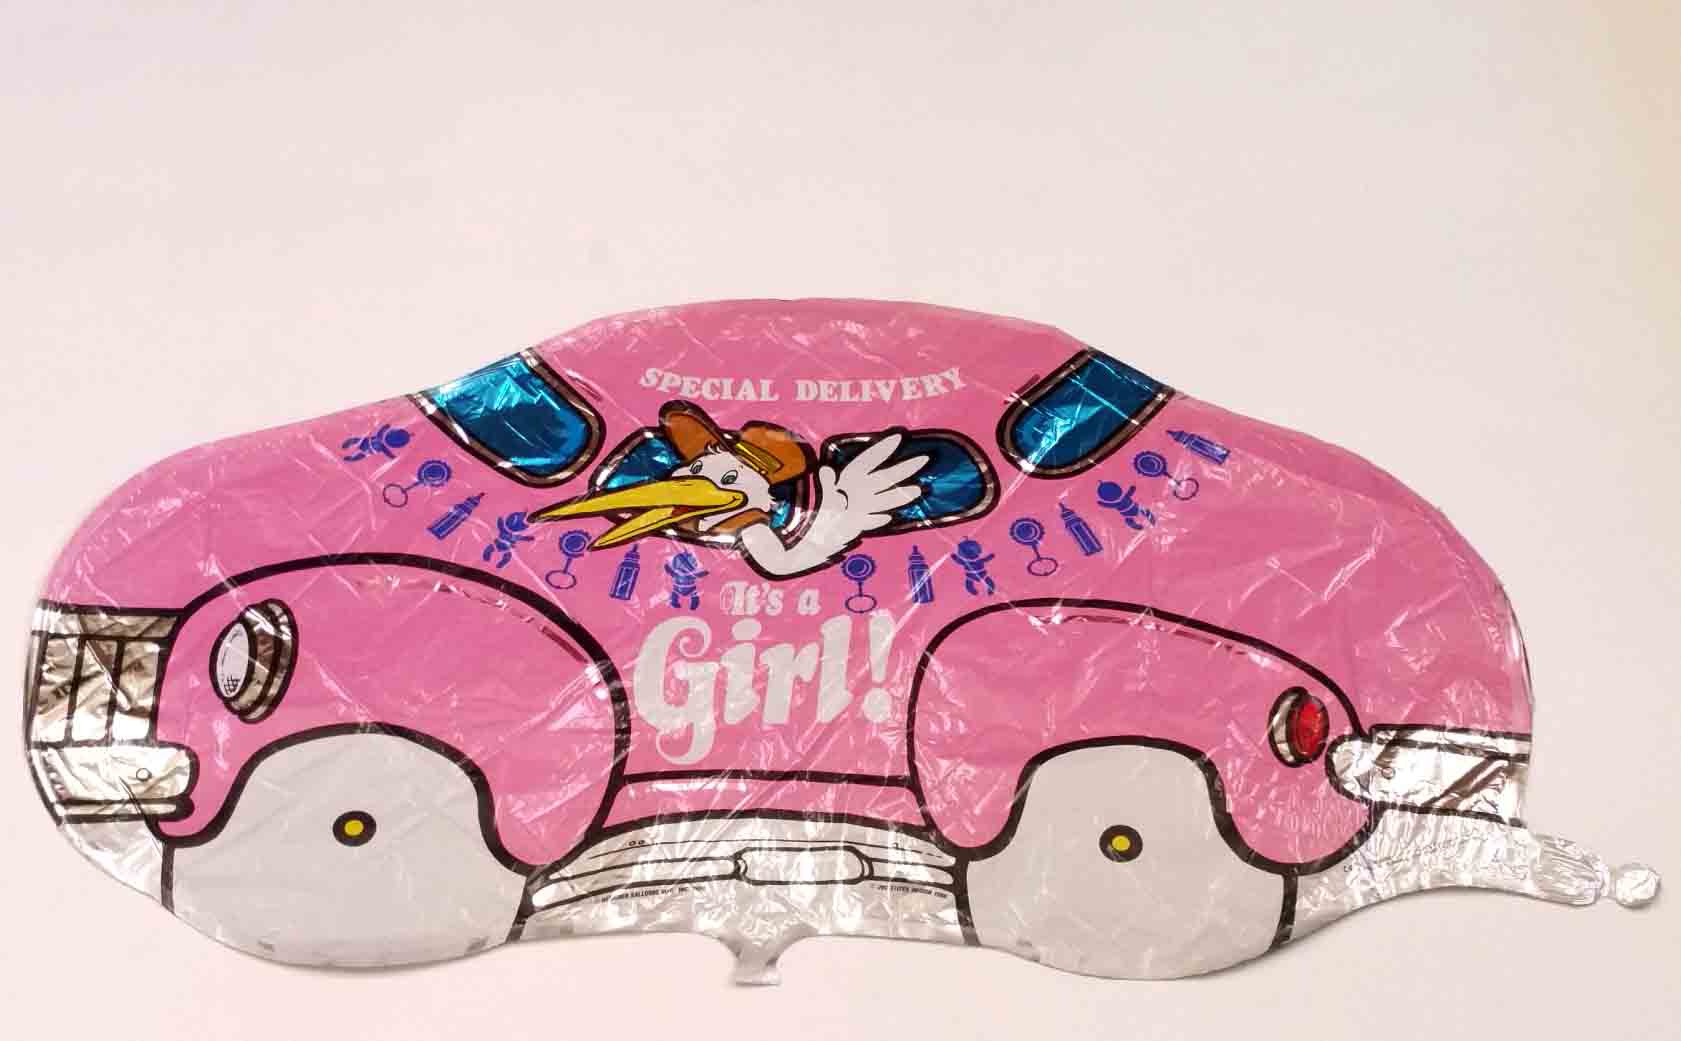 5606 - 26" Flat - SPECIAL DELIVERY/It's a Girl! - .99 ea